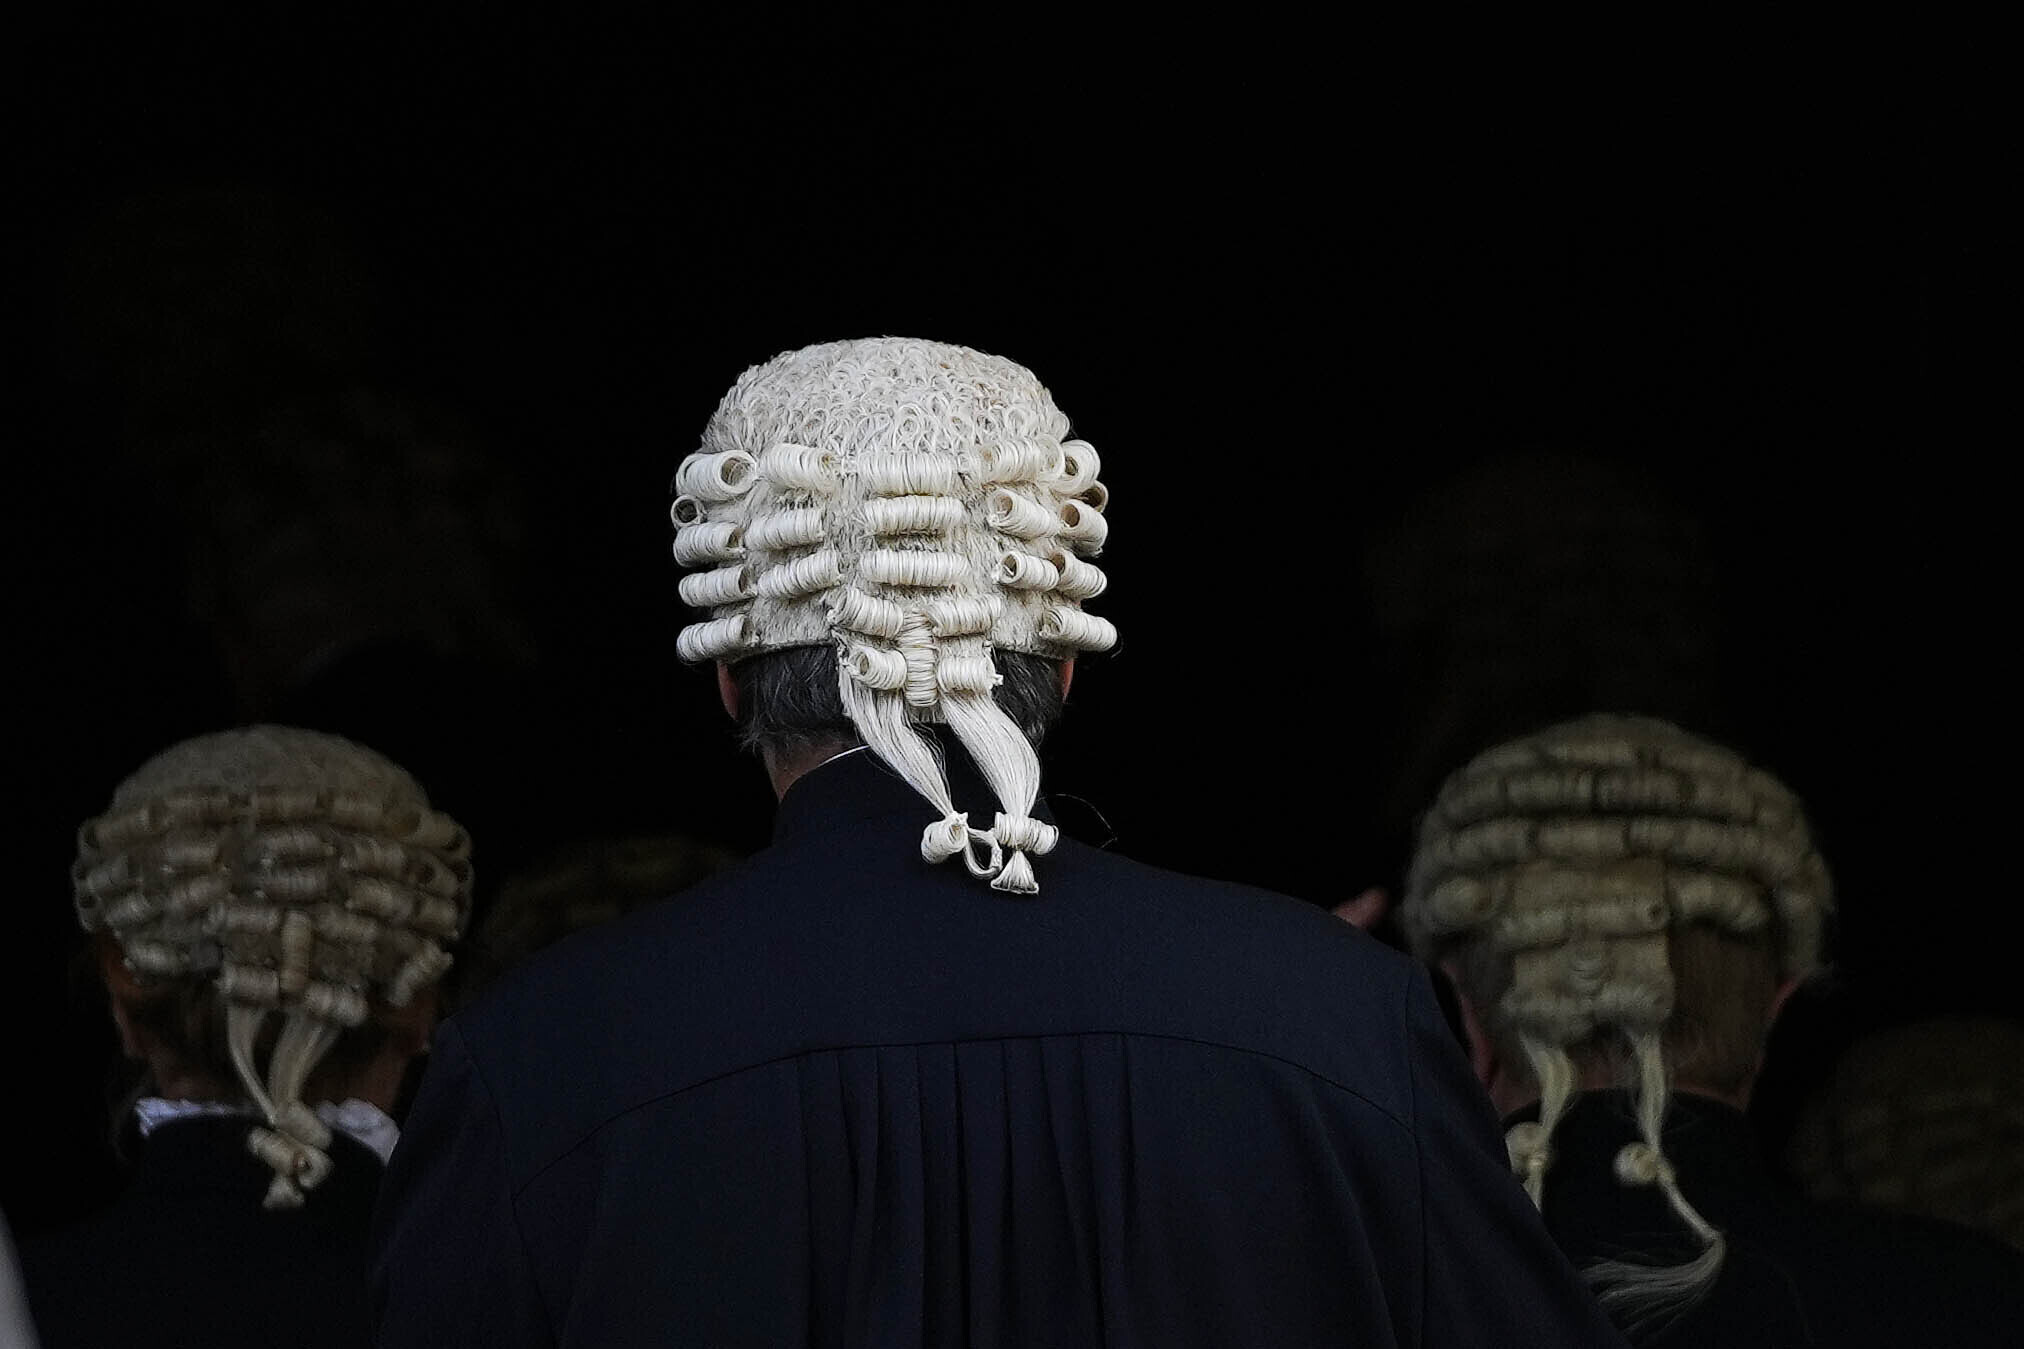 FILE - Judges walk into Parliament after a Service at Westminster Abbey for the opening of the new legal year in London, Friday, Oct. 1, 2021. Judges in England and Wales have been given approval to use artificial intelligence to help writing legal opinions. The judiciary issued its first guidance last month on the use of AI. The step puts the courts at the forefront of legal systems grappling with how to regulate AI. (AP Photo/Frank Augstein, File)